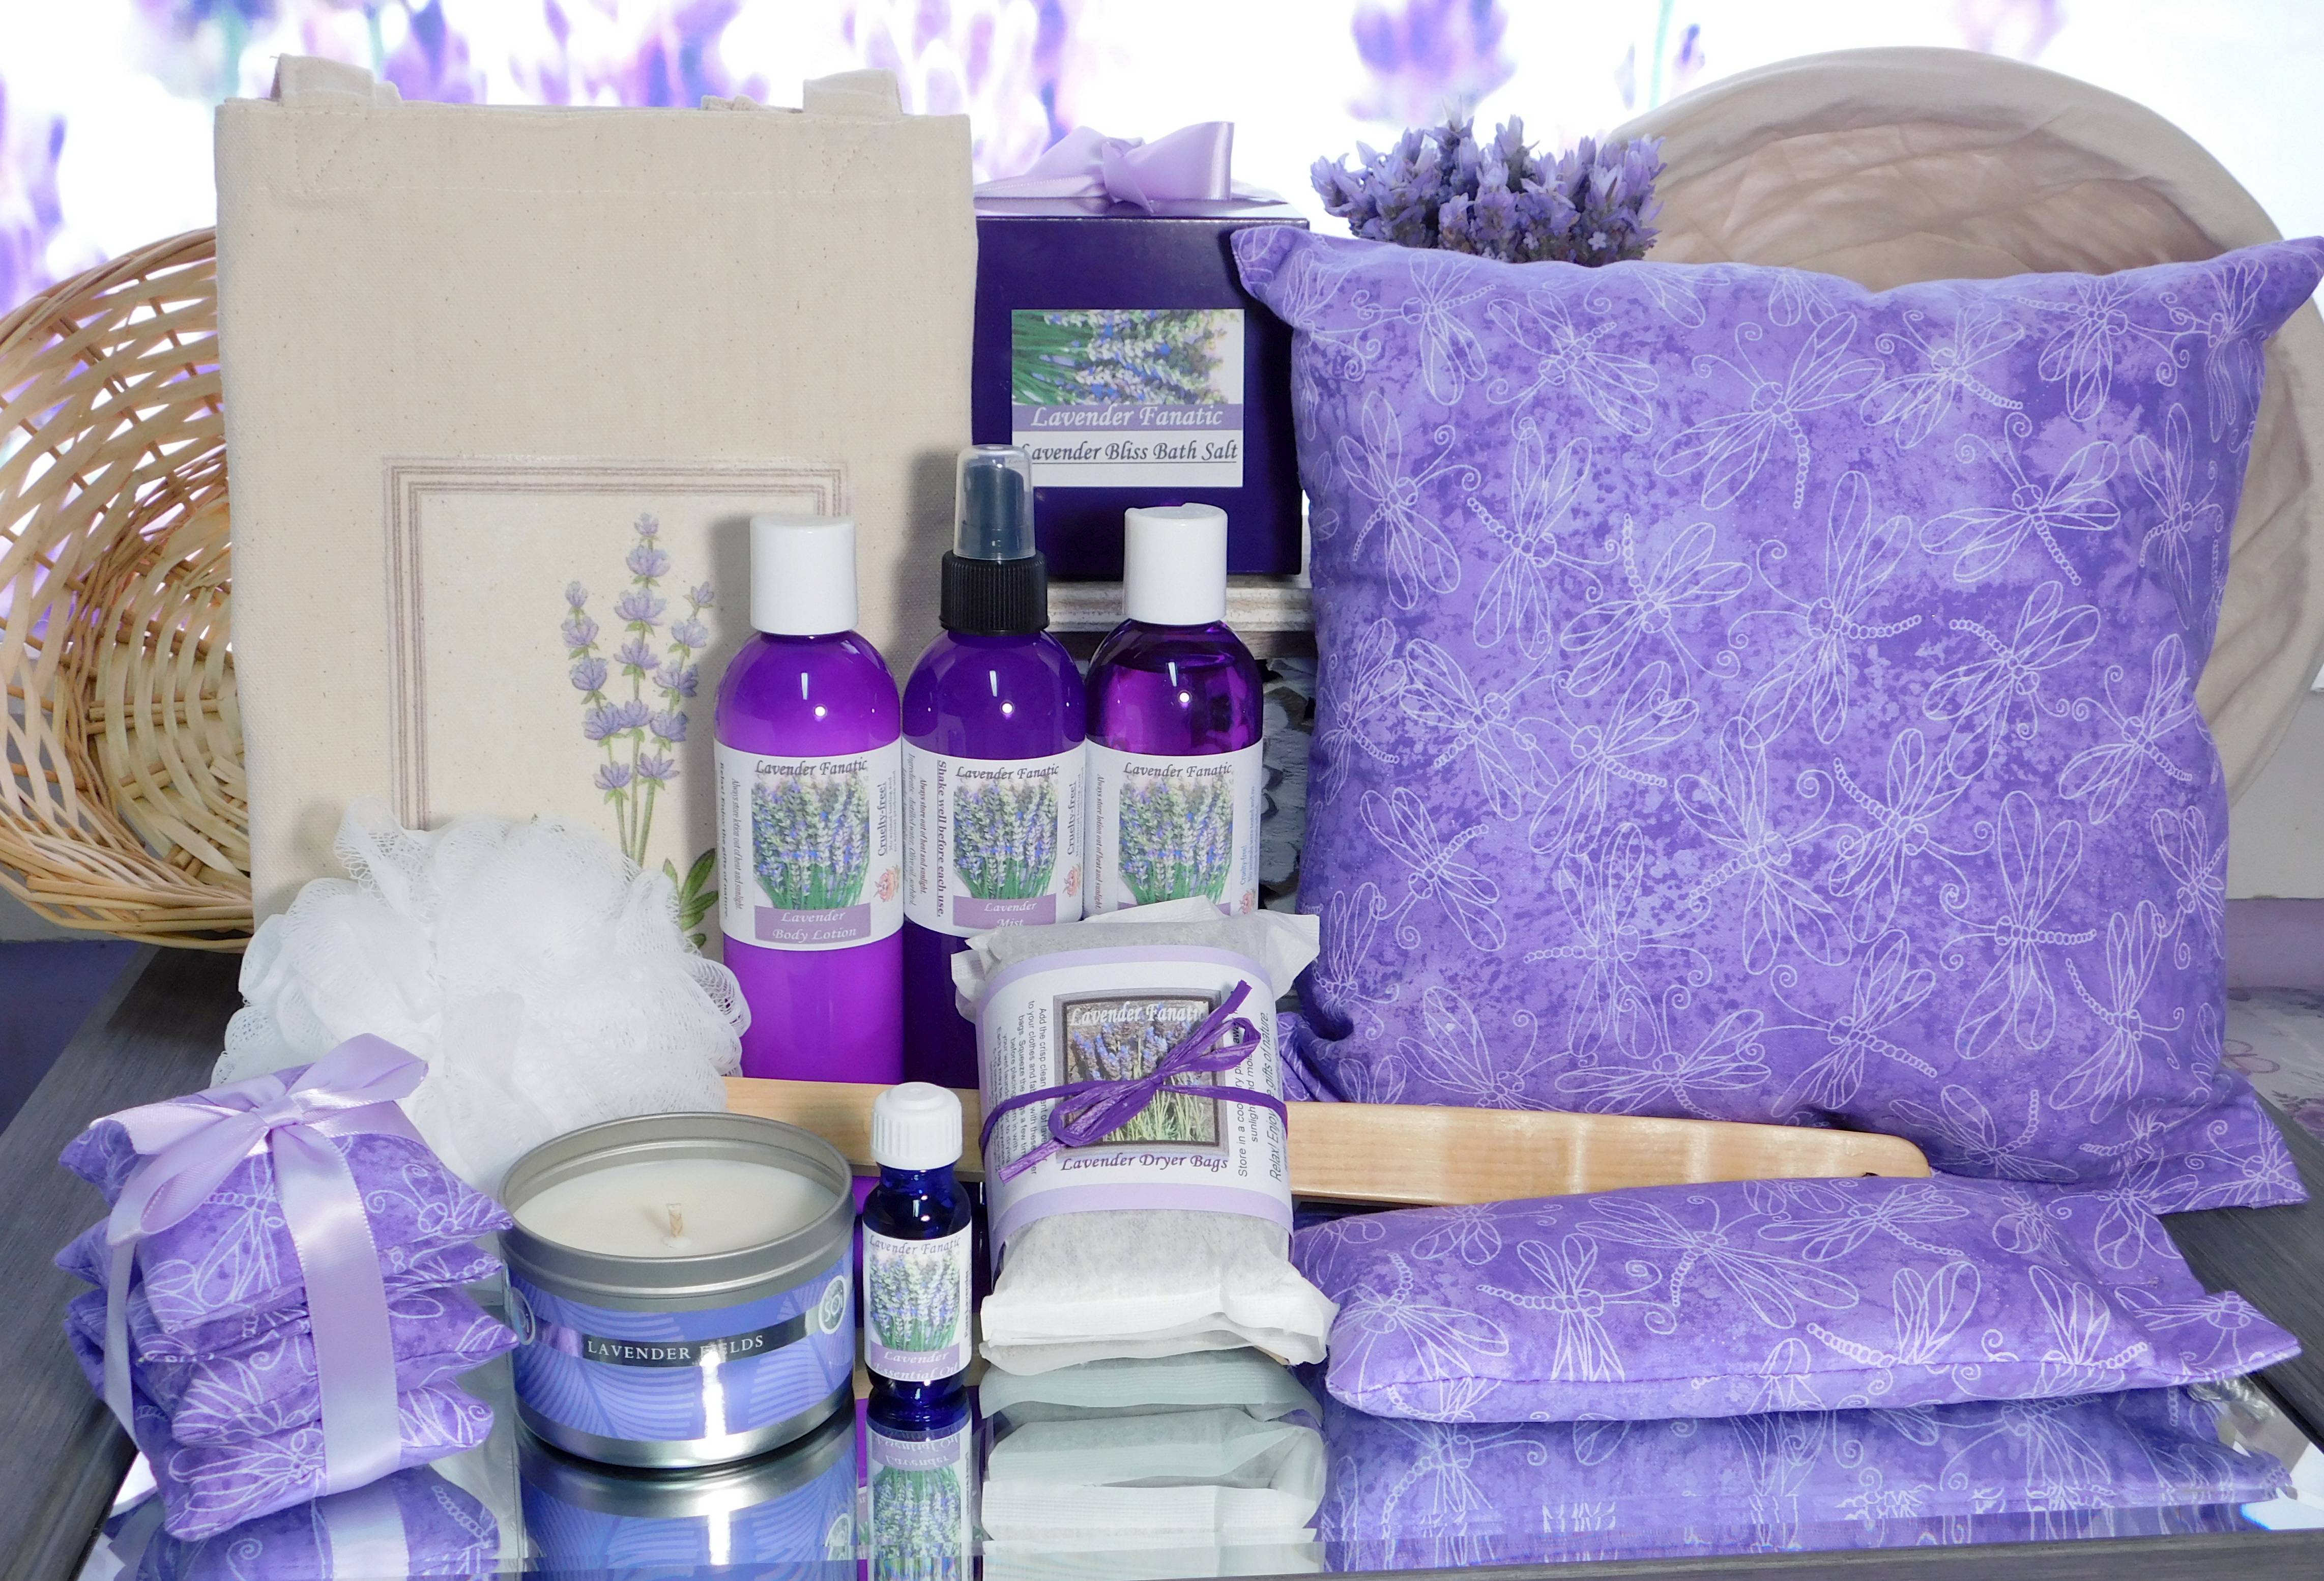 Loaded Lavender Gift Set by Lavender Fanatic.